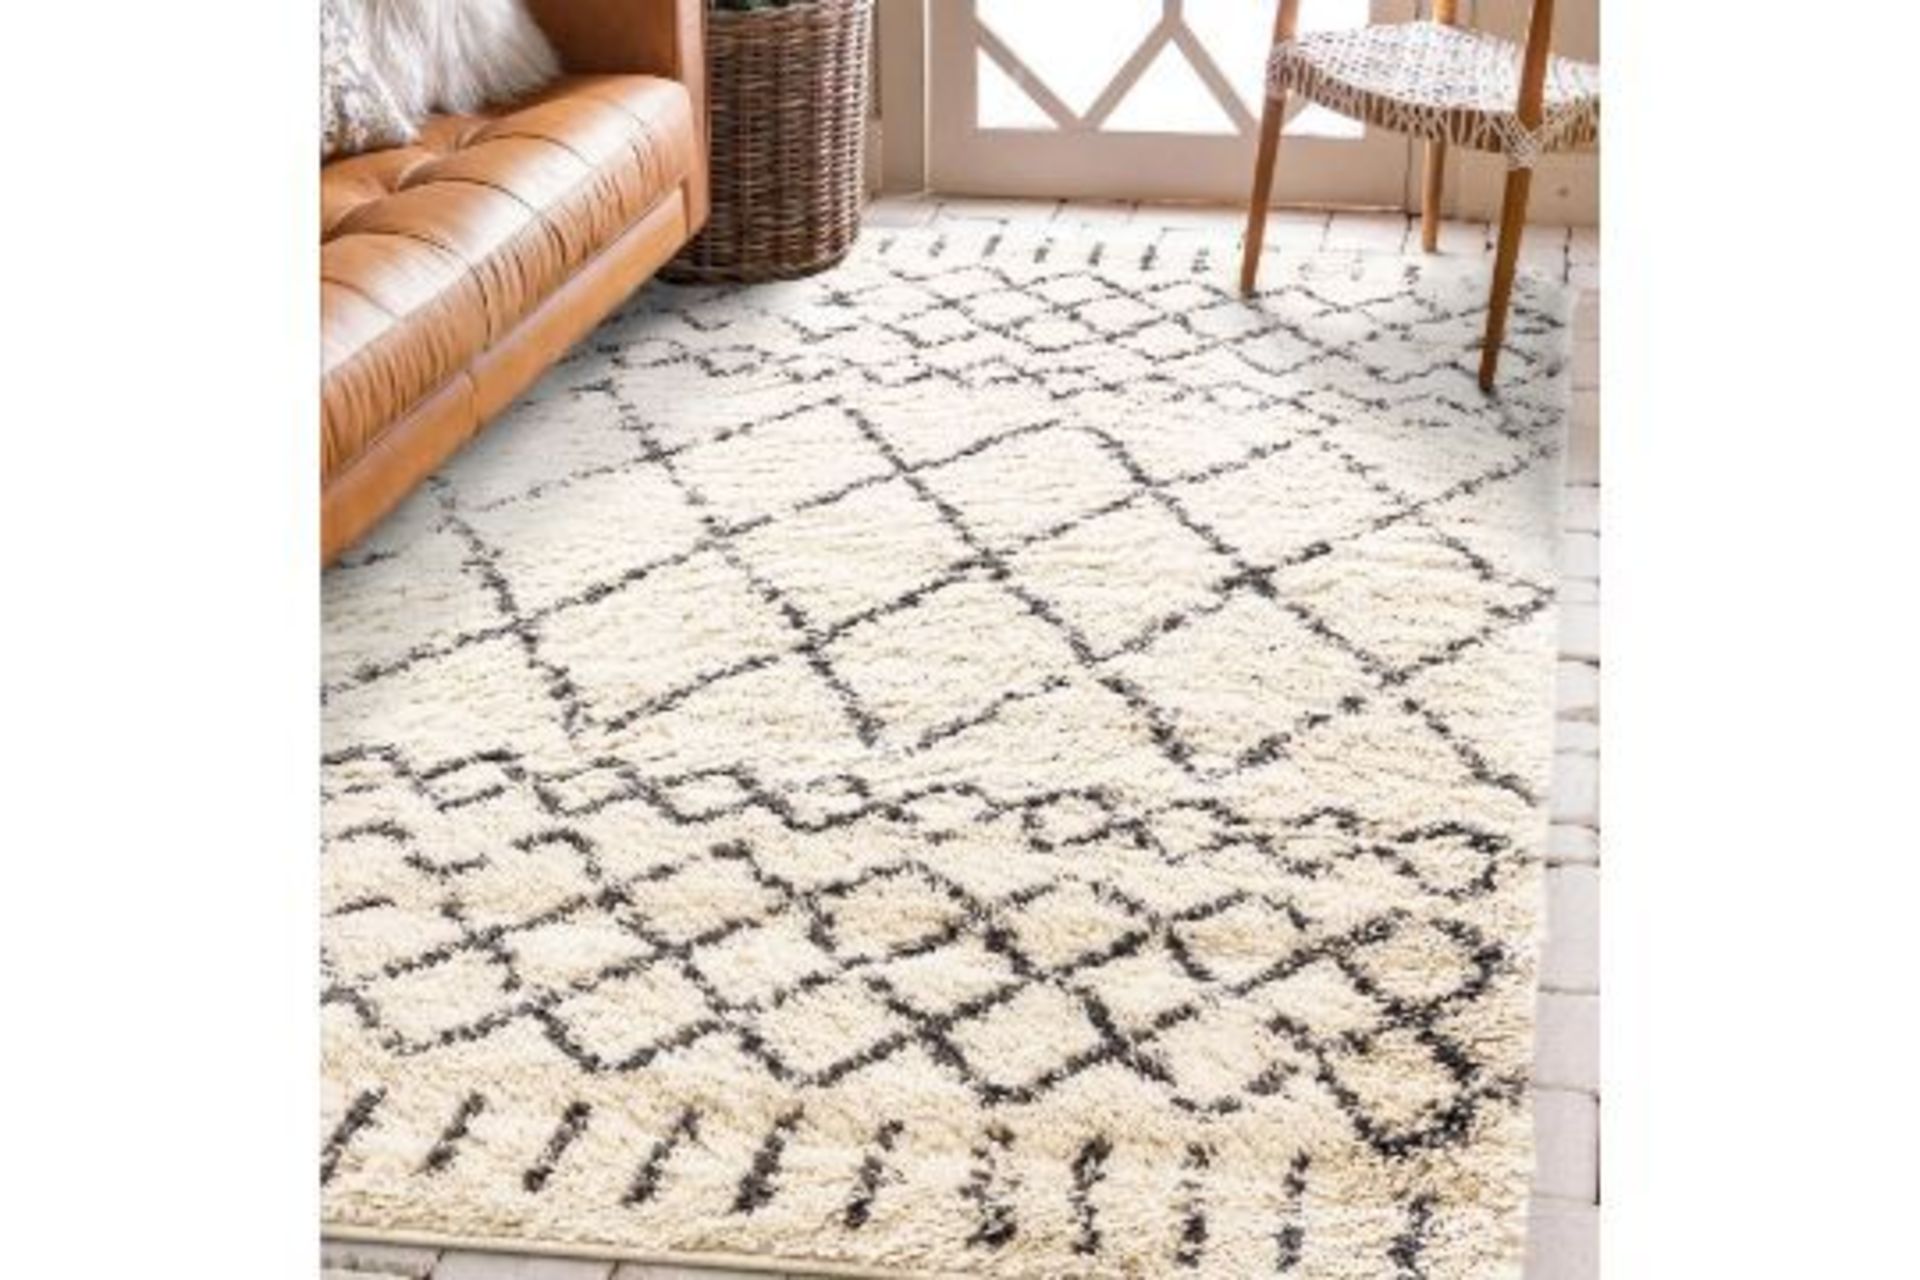 New Nordic 110x160cm Cream & Charcoal - 100% Polypropylene Rug - £10 Delivery